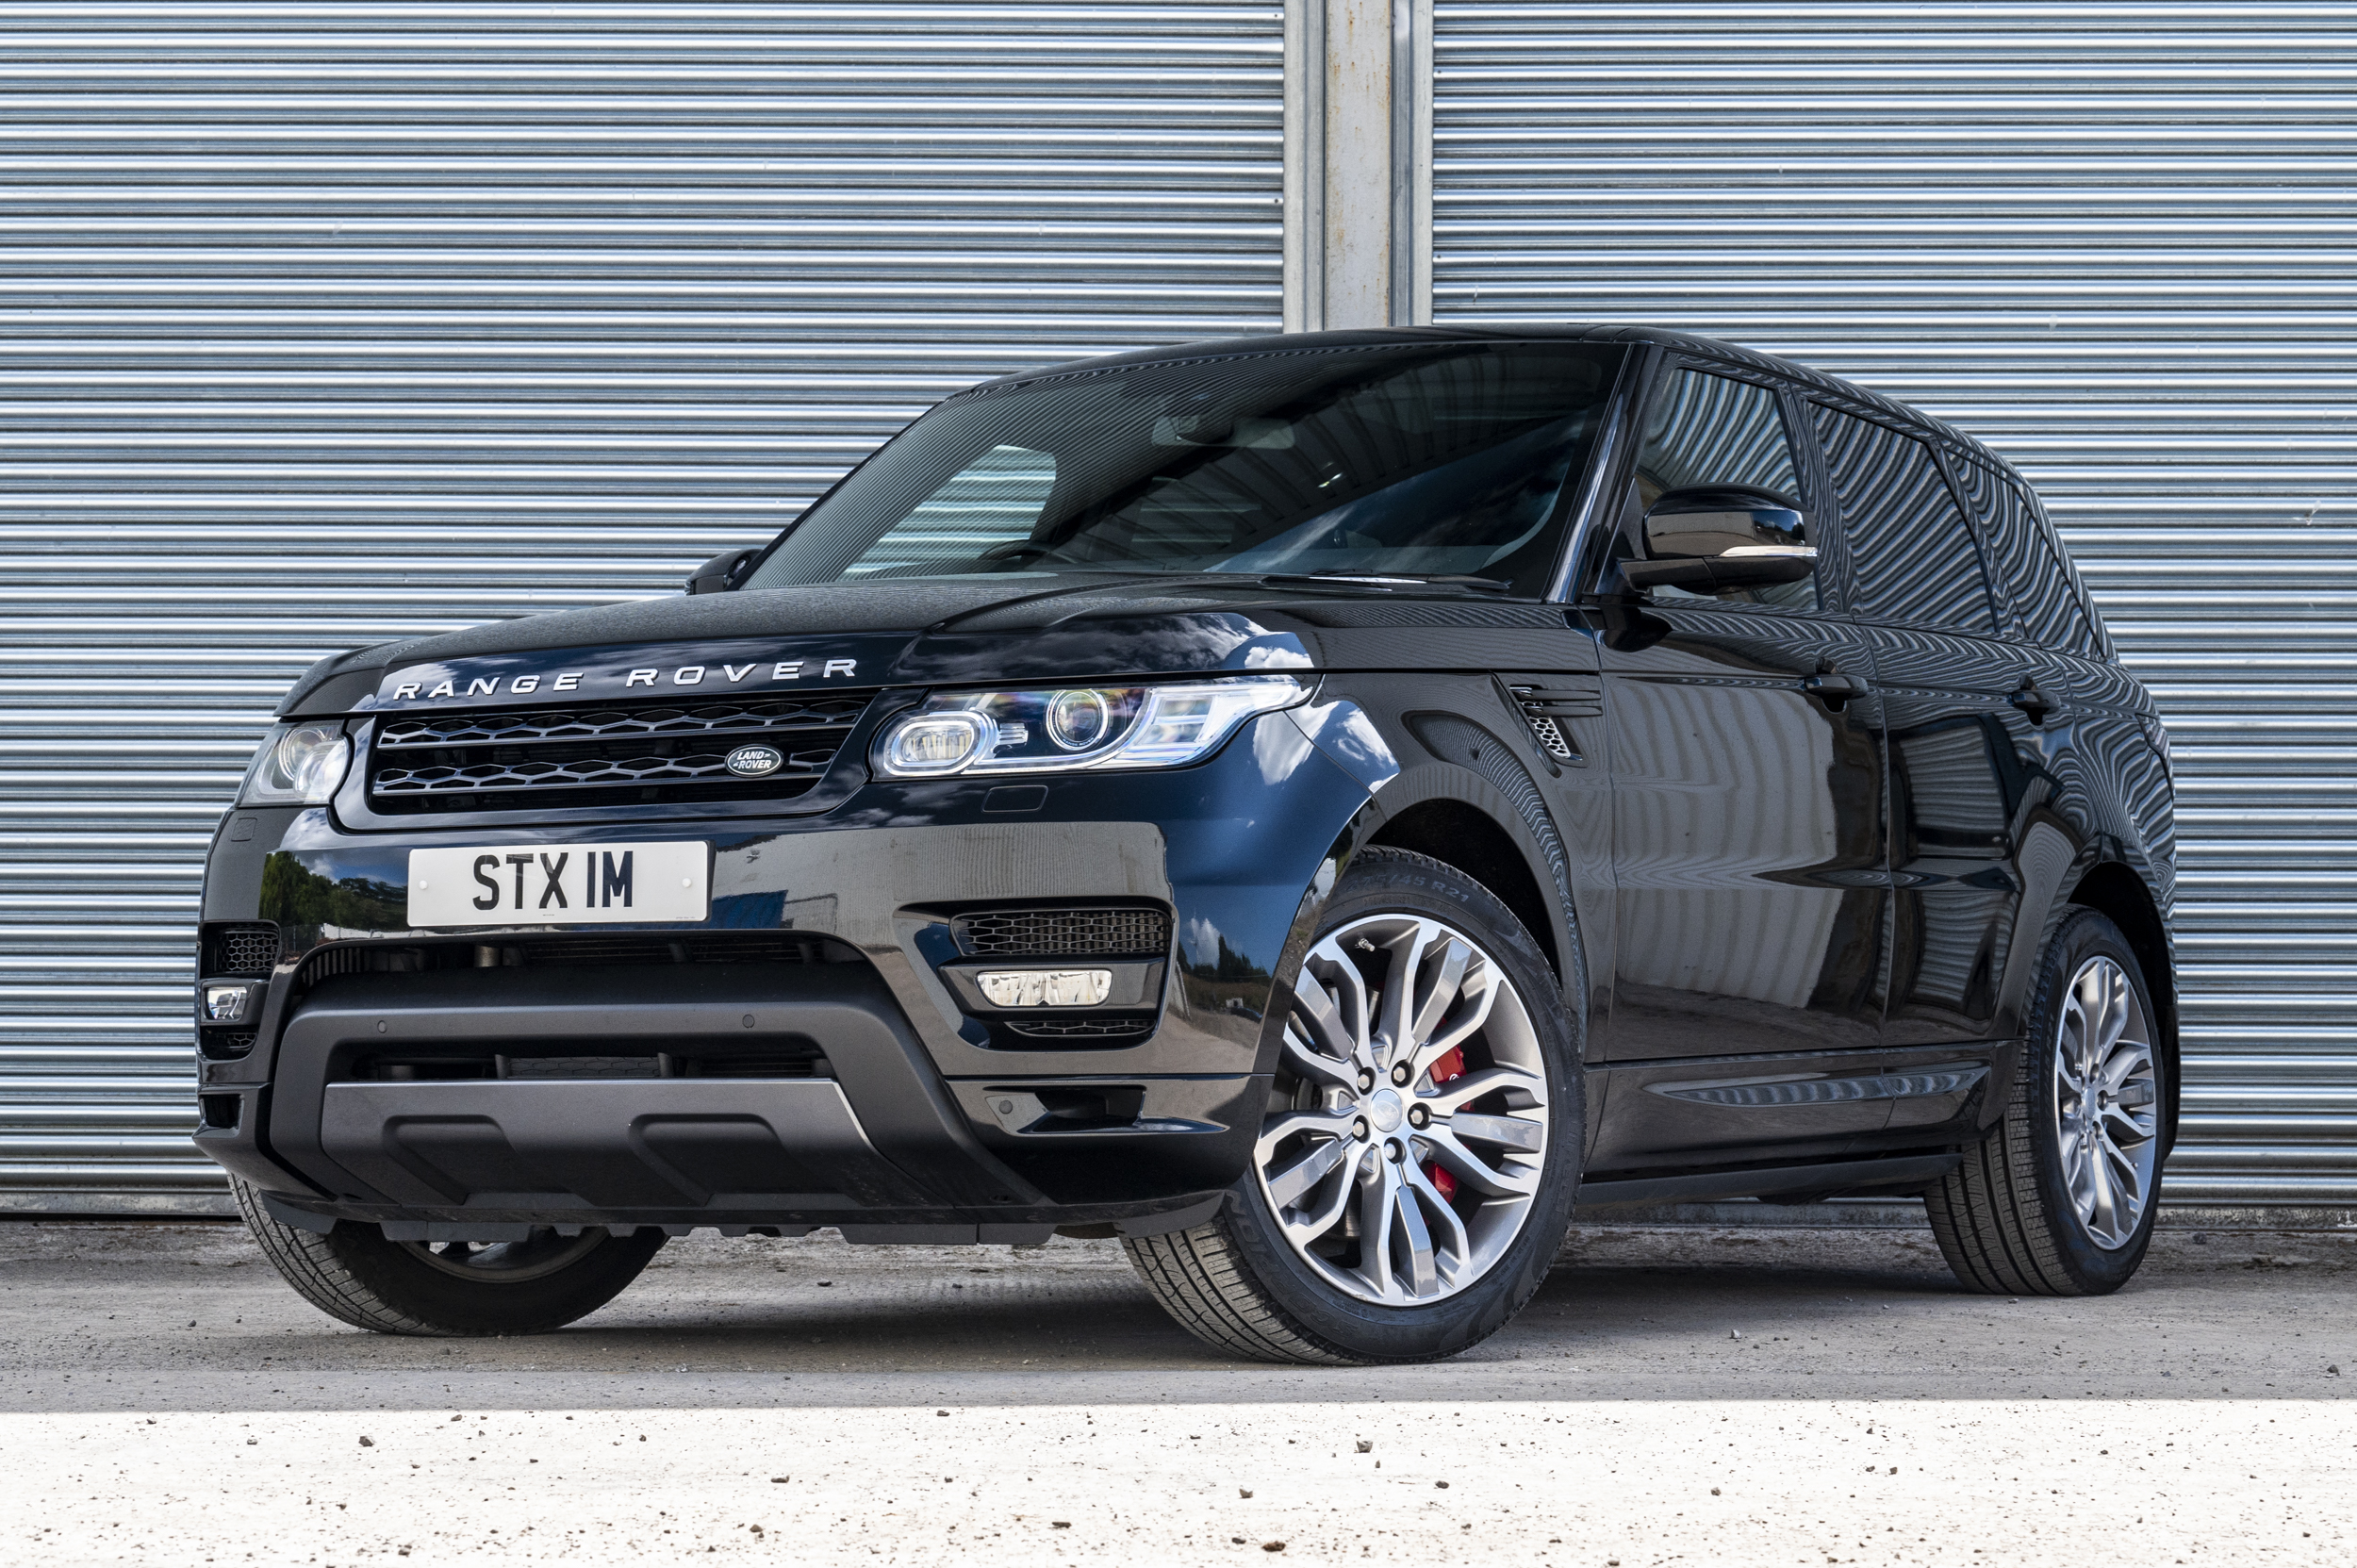 2016 RANGE ROVER SPORT 4.4 SDV8 AUTOBIOGRAPHY for sale by auction in  Bridgend, Wales, United Kingdom